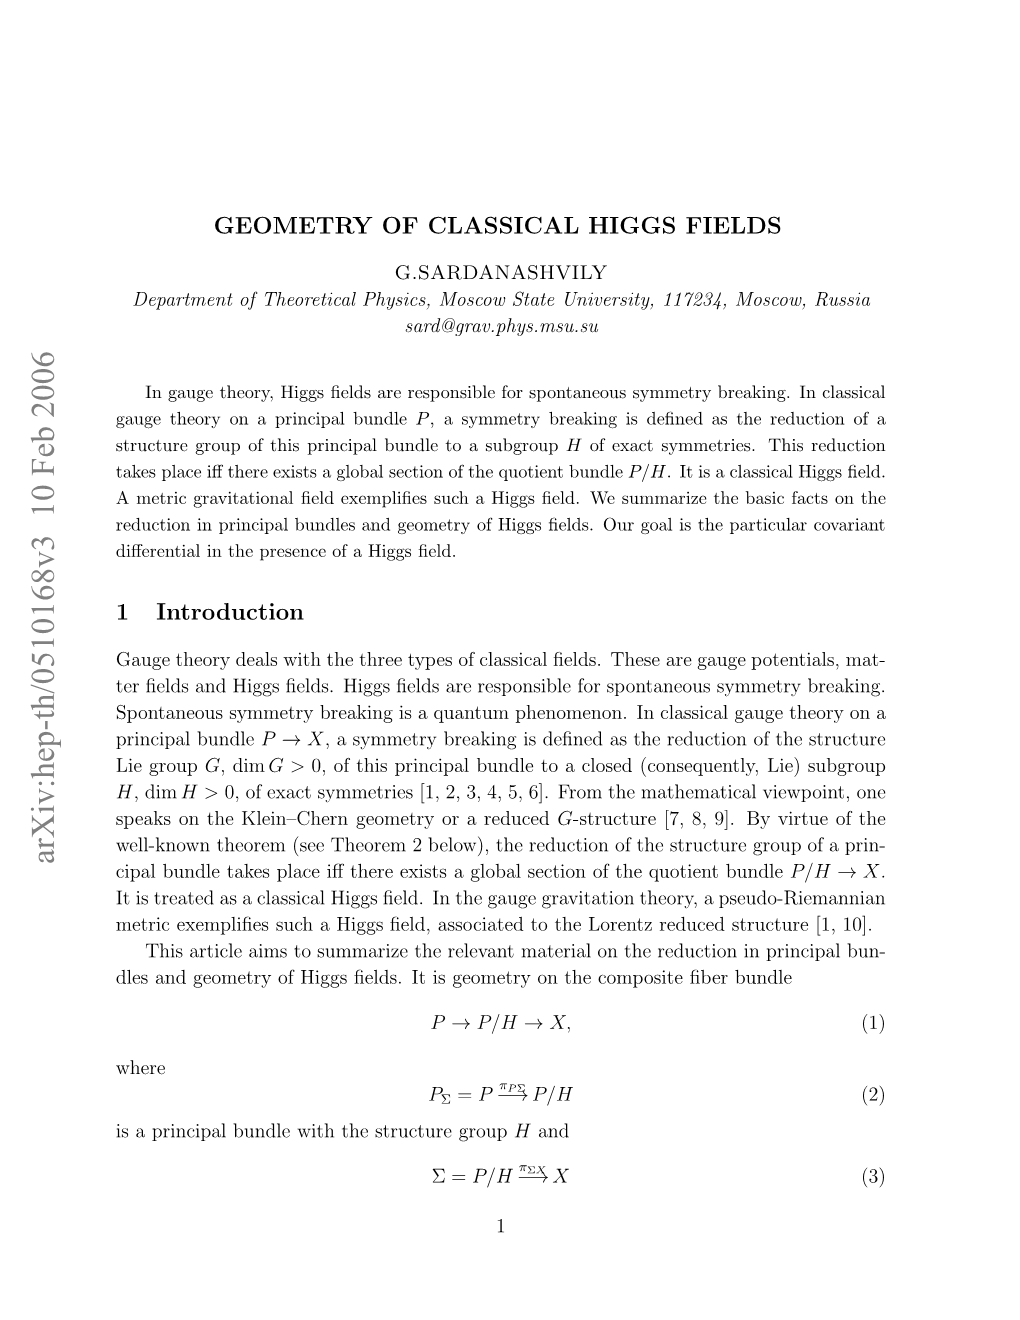 Geometry of Classical Higgs Fields